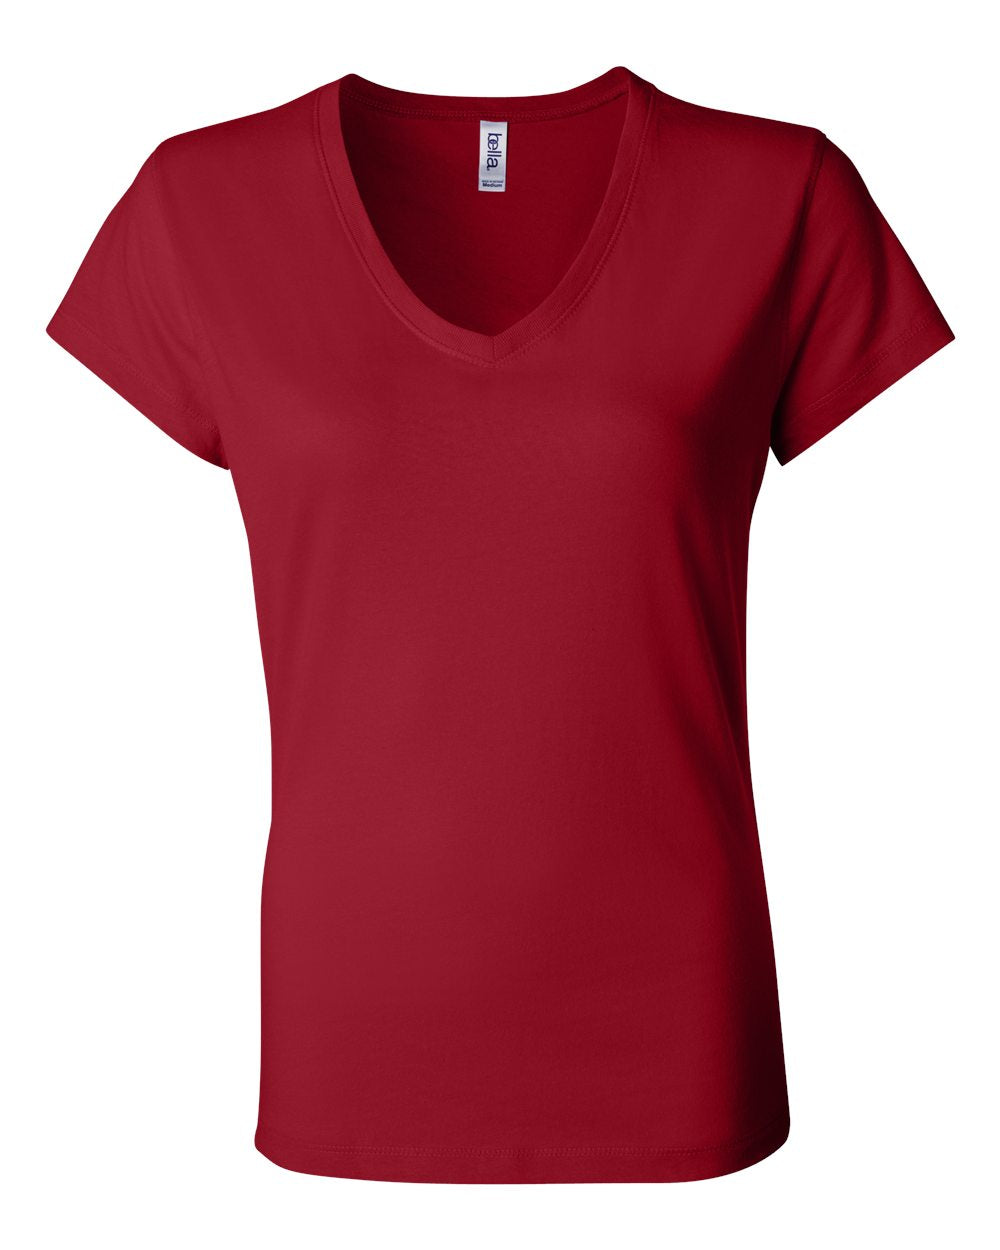 bella+canvas womens v-neck tee red